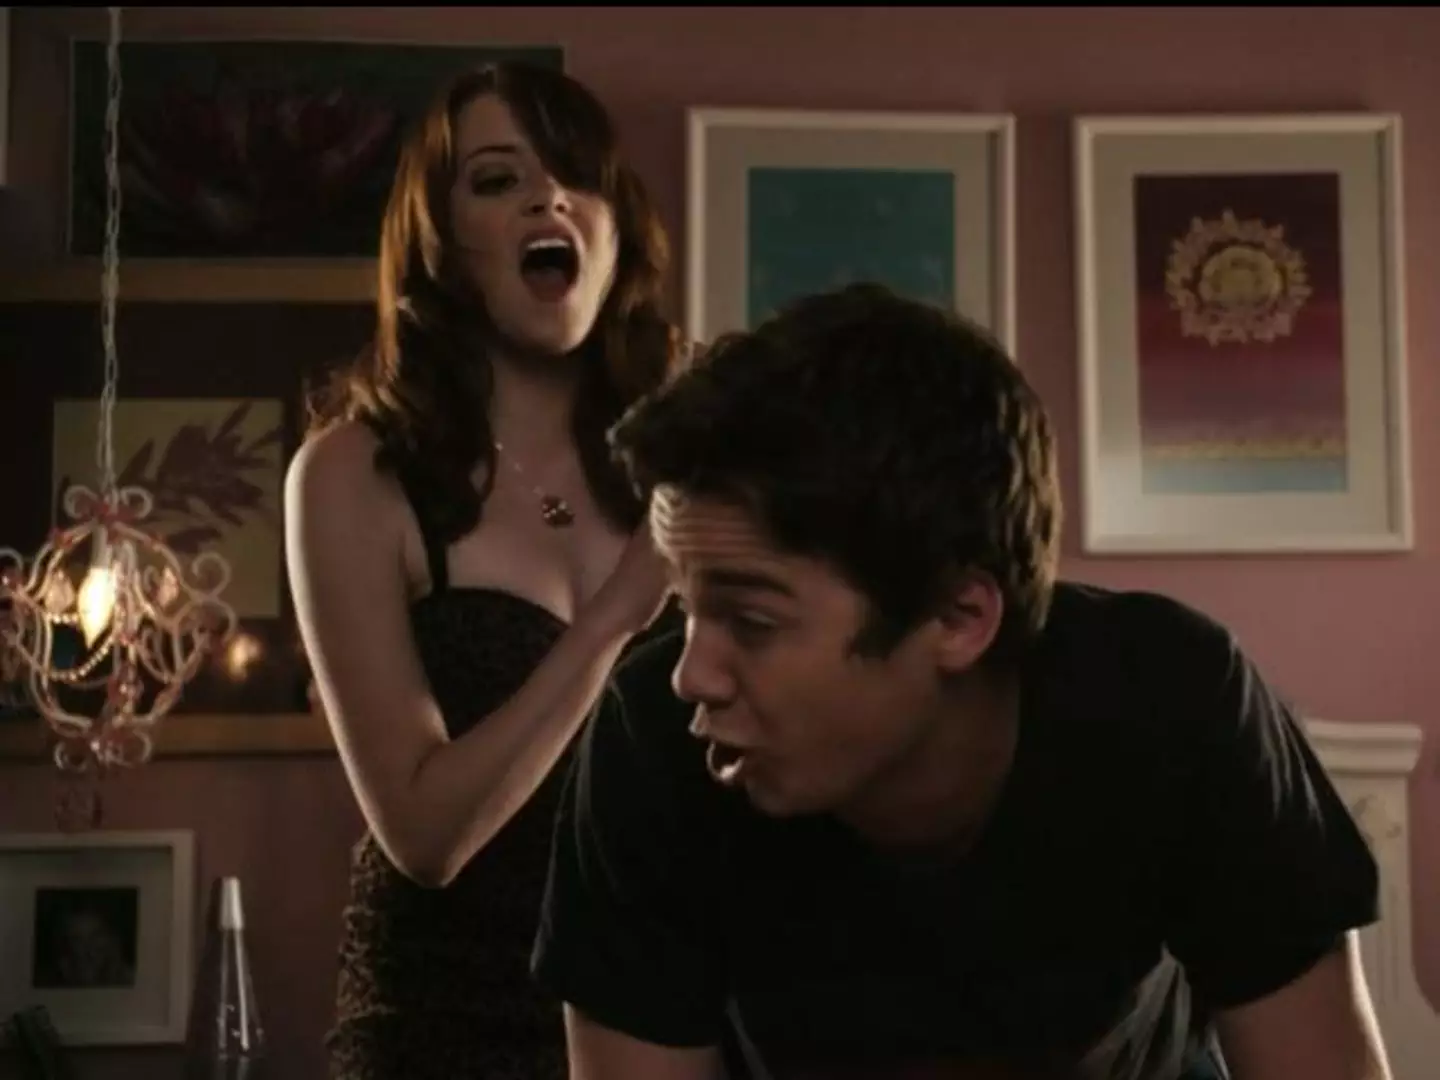 Emma made the discovery filming this scene in Easy A.